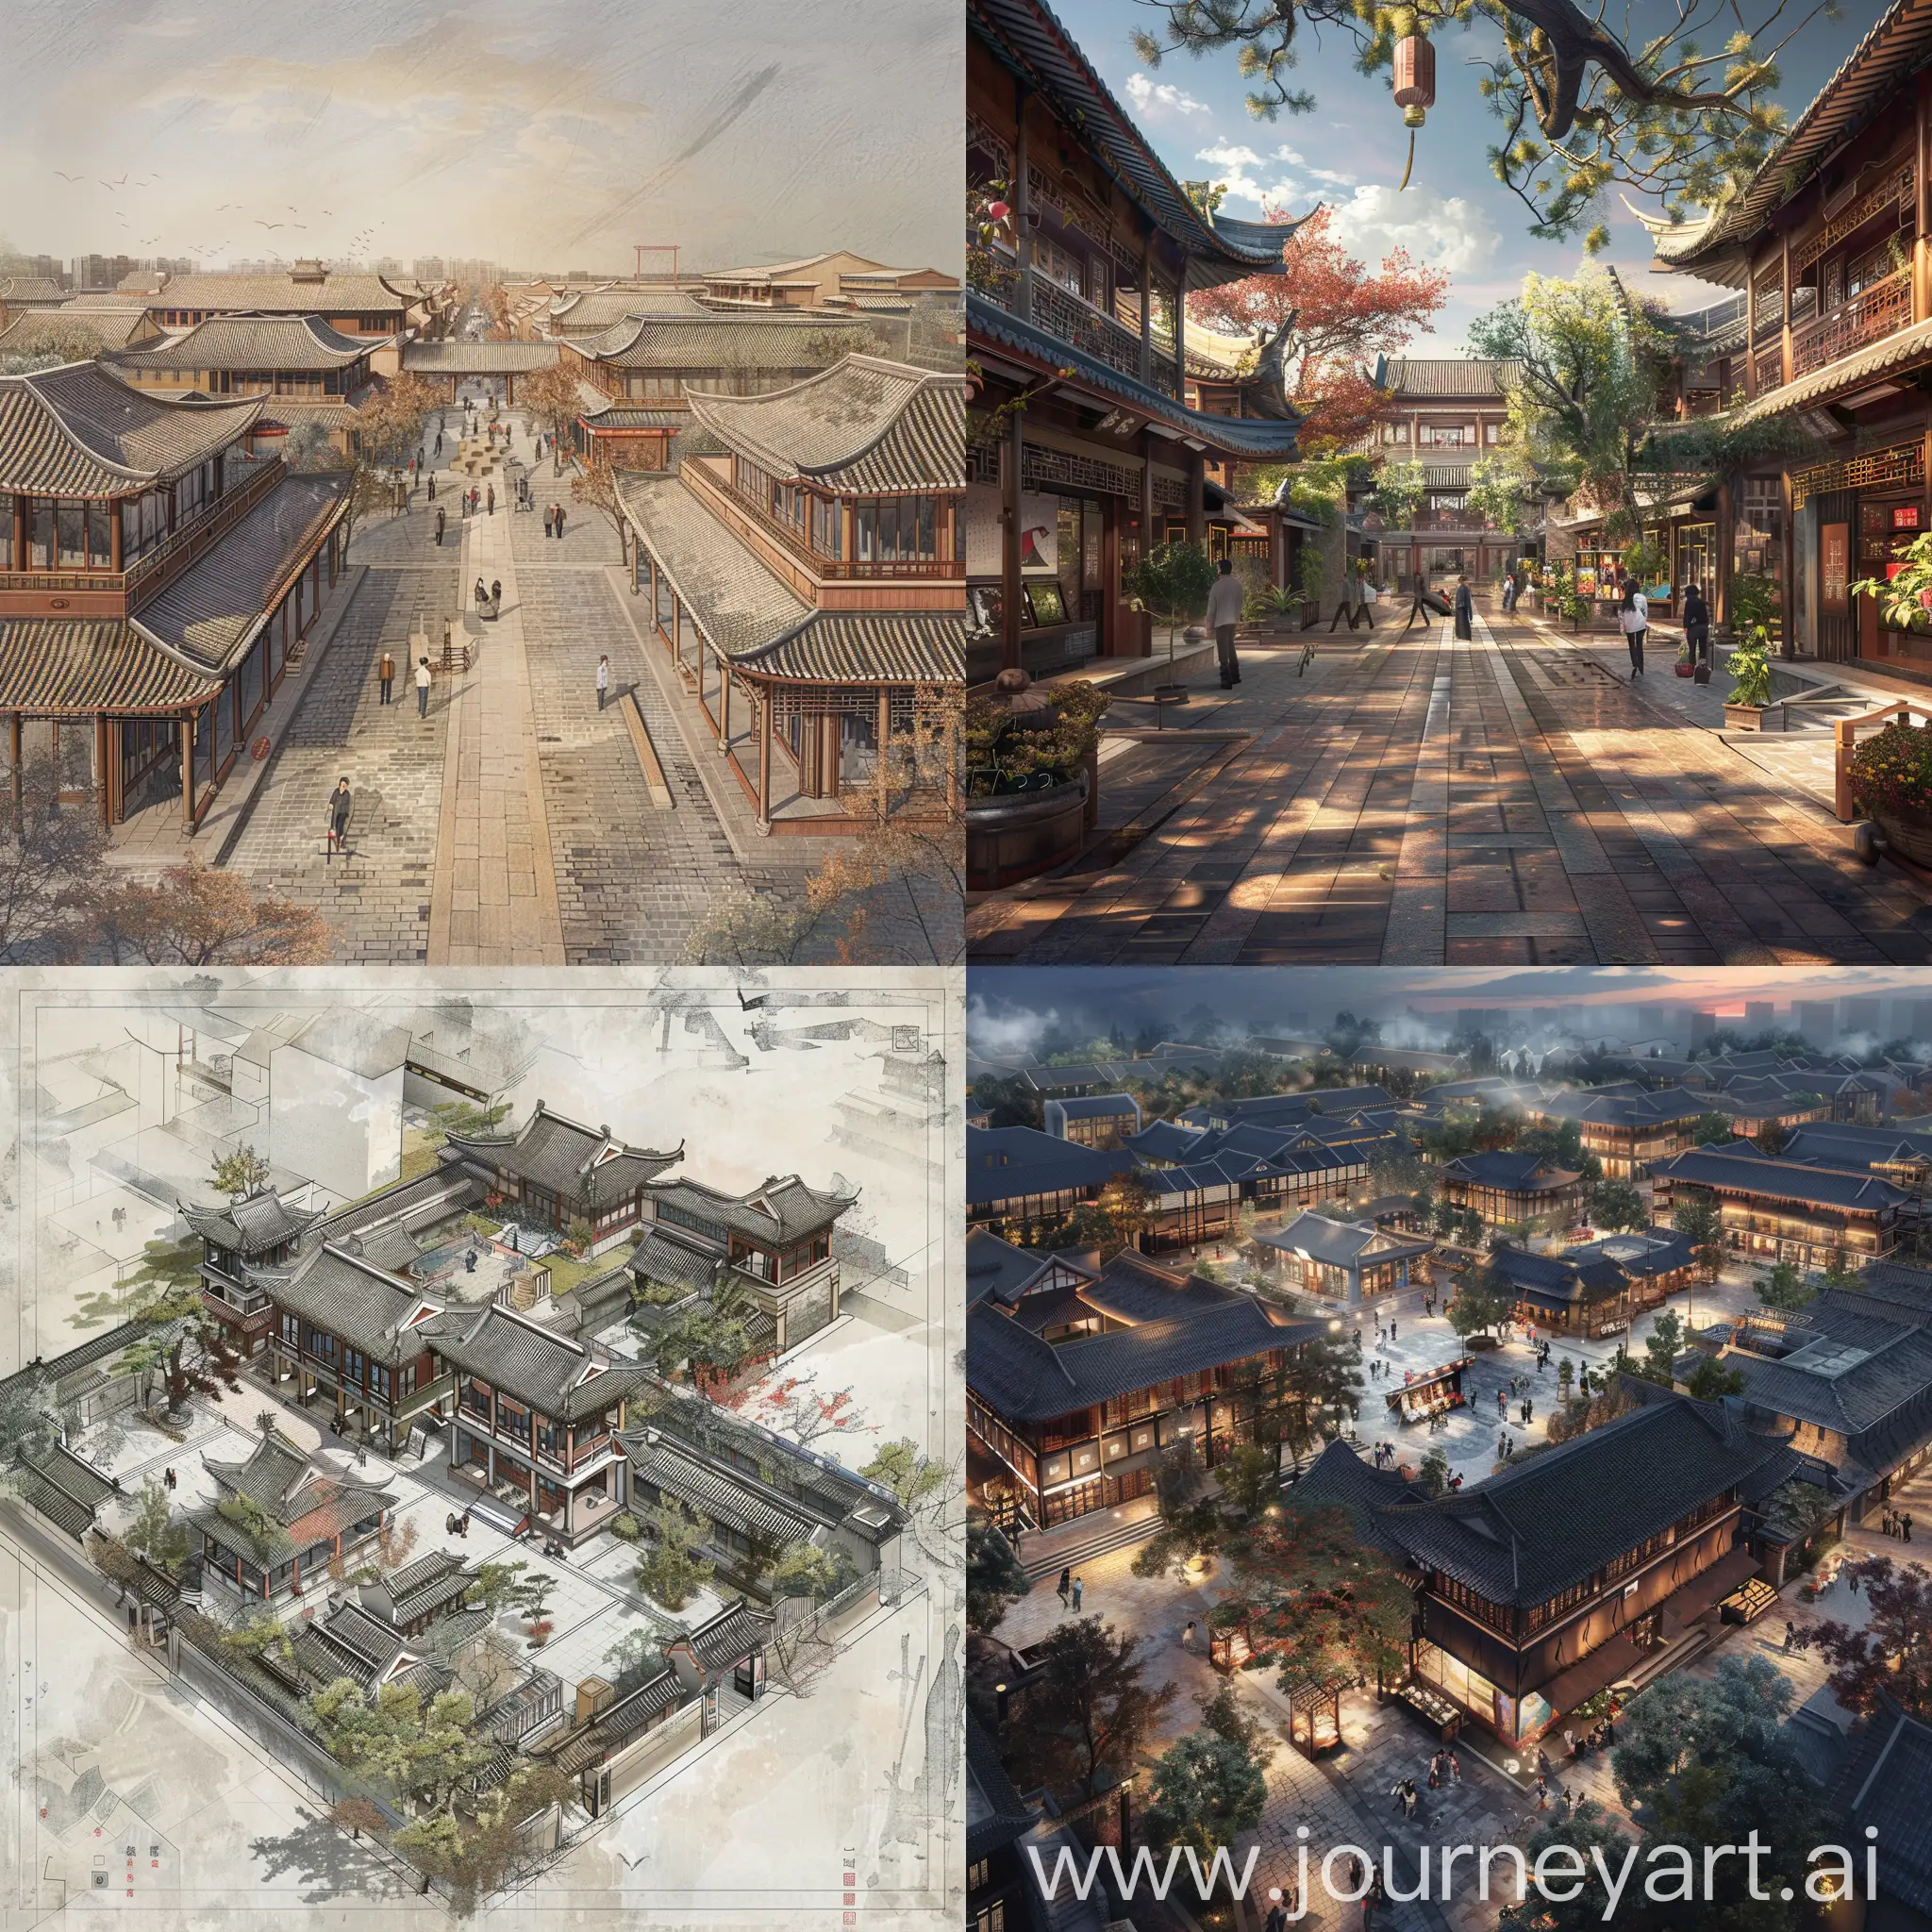 Transformation-of-an-Old-Beijing-Quadrangle-into-a-Traditional-Chinese-Art-Market